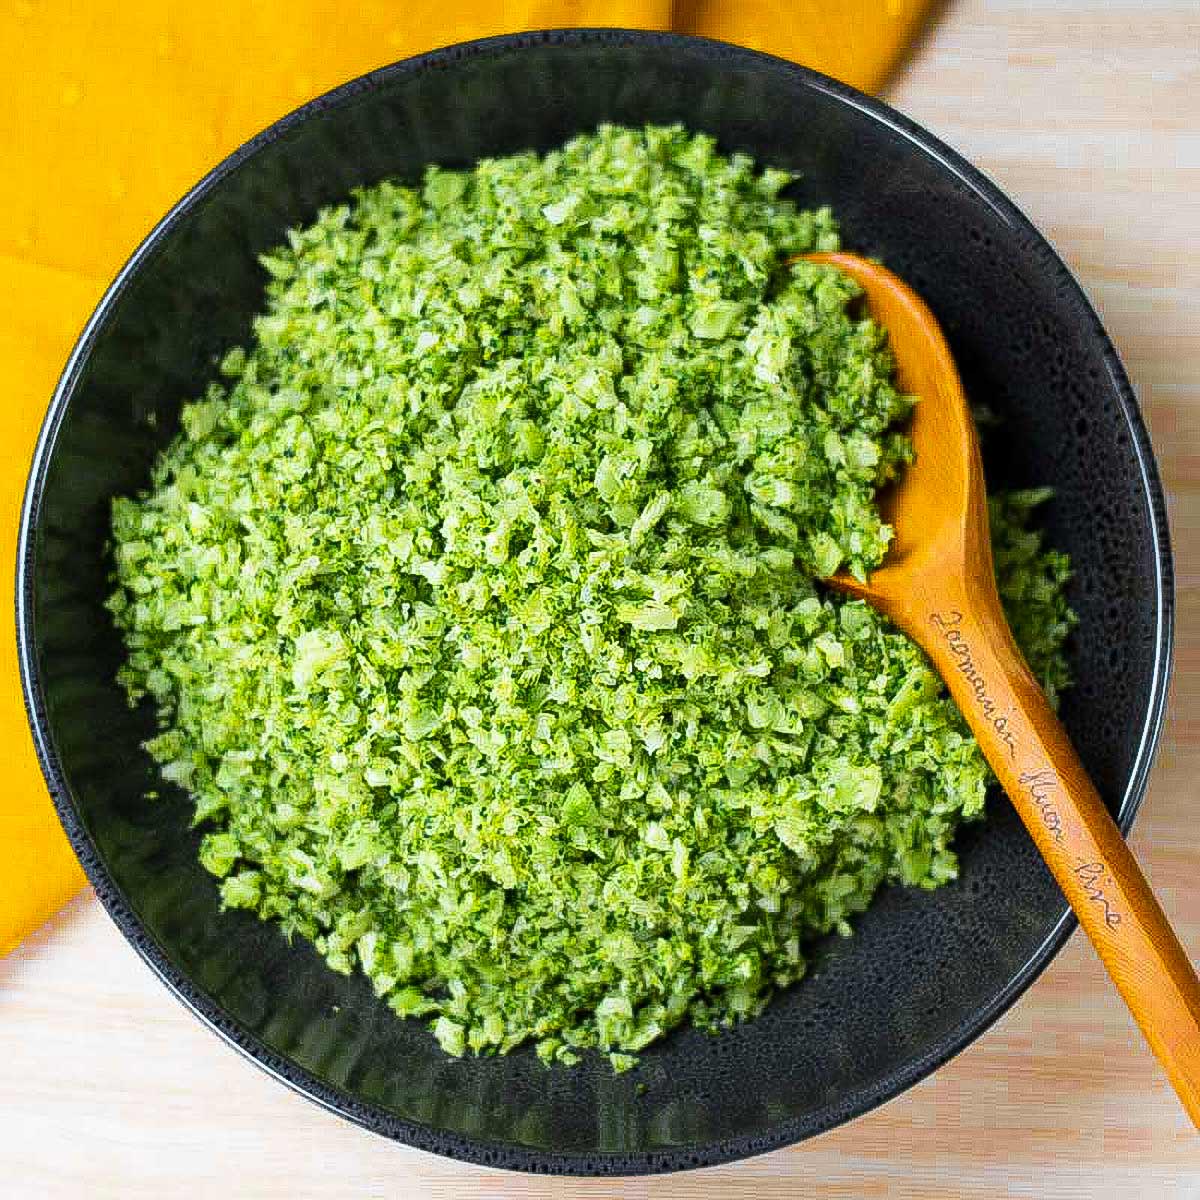 Broccoli rice in a frying pan.